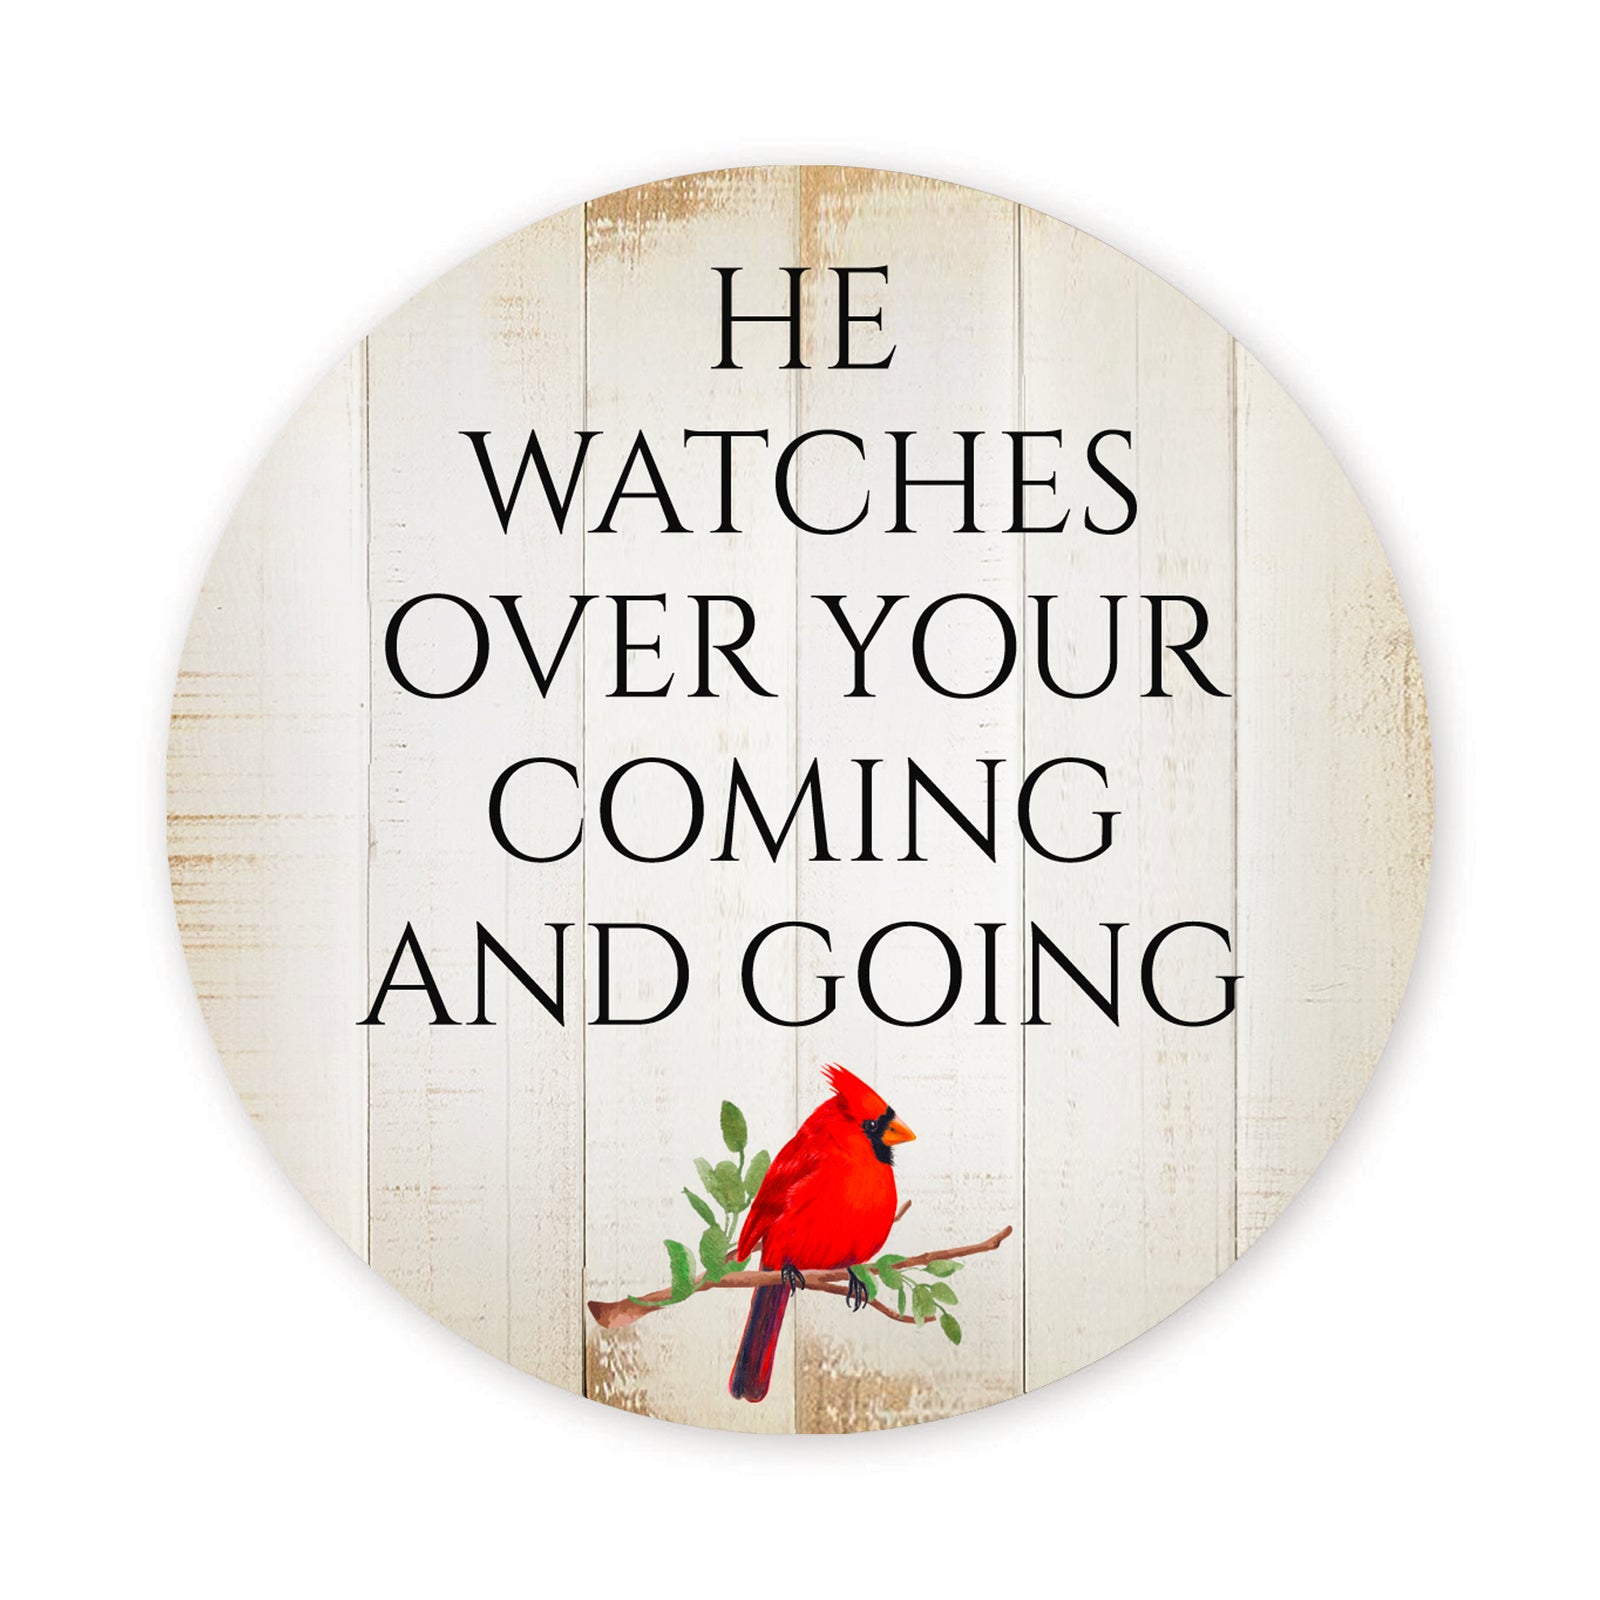 Vintage-Inspired Cardinal Wooden Magnet Printed With Everyday Inspirational Verses Gift Ideas - He Watches Over